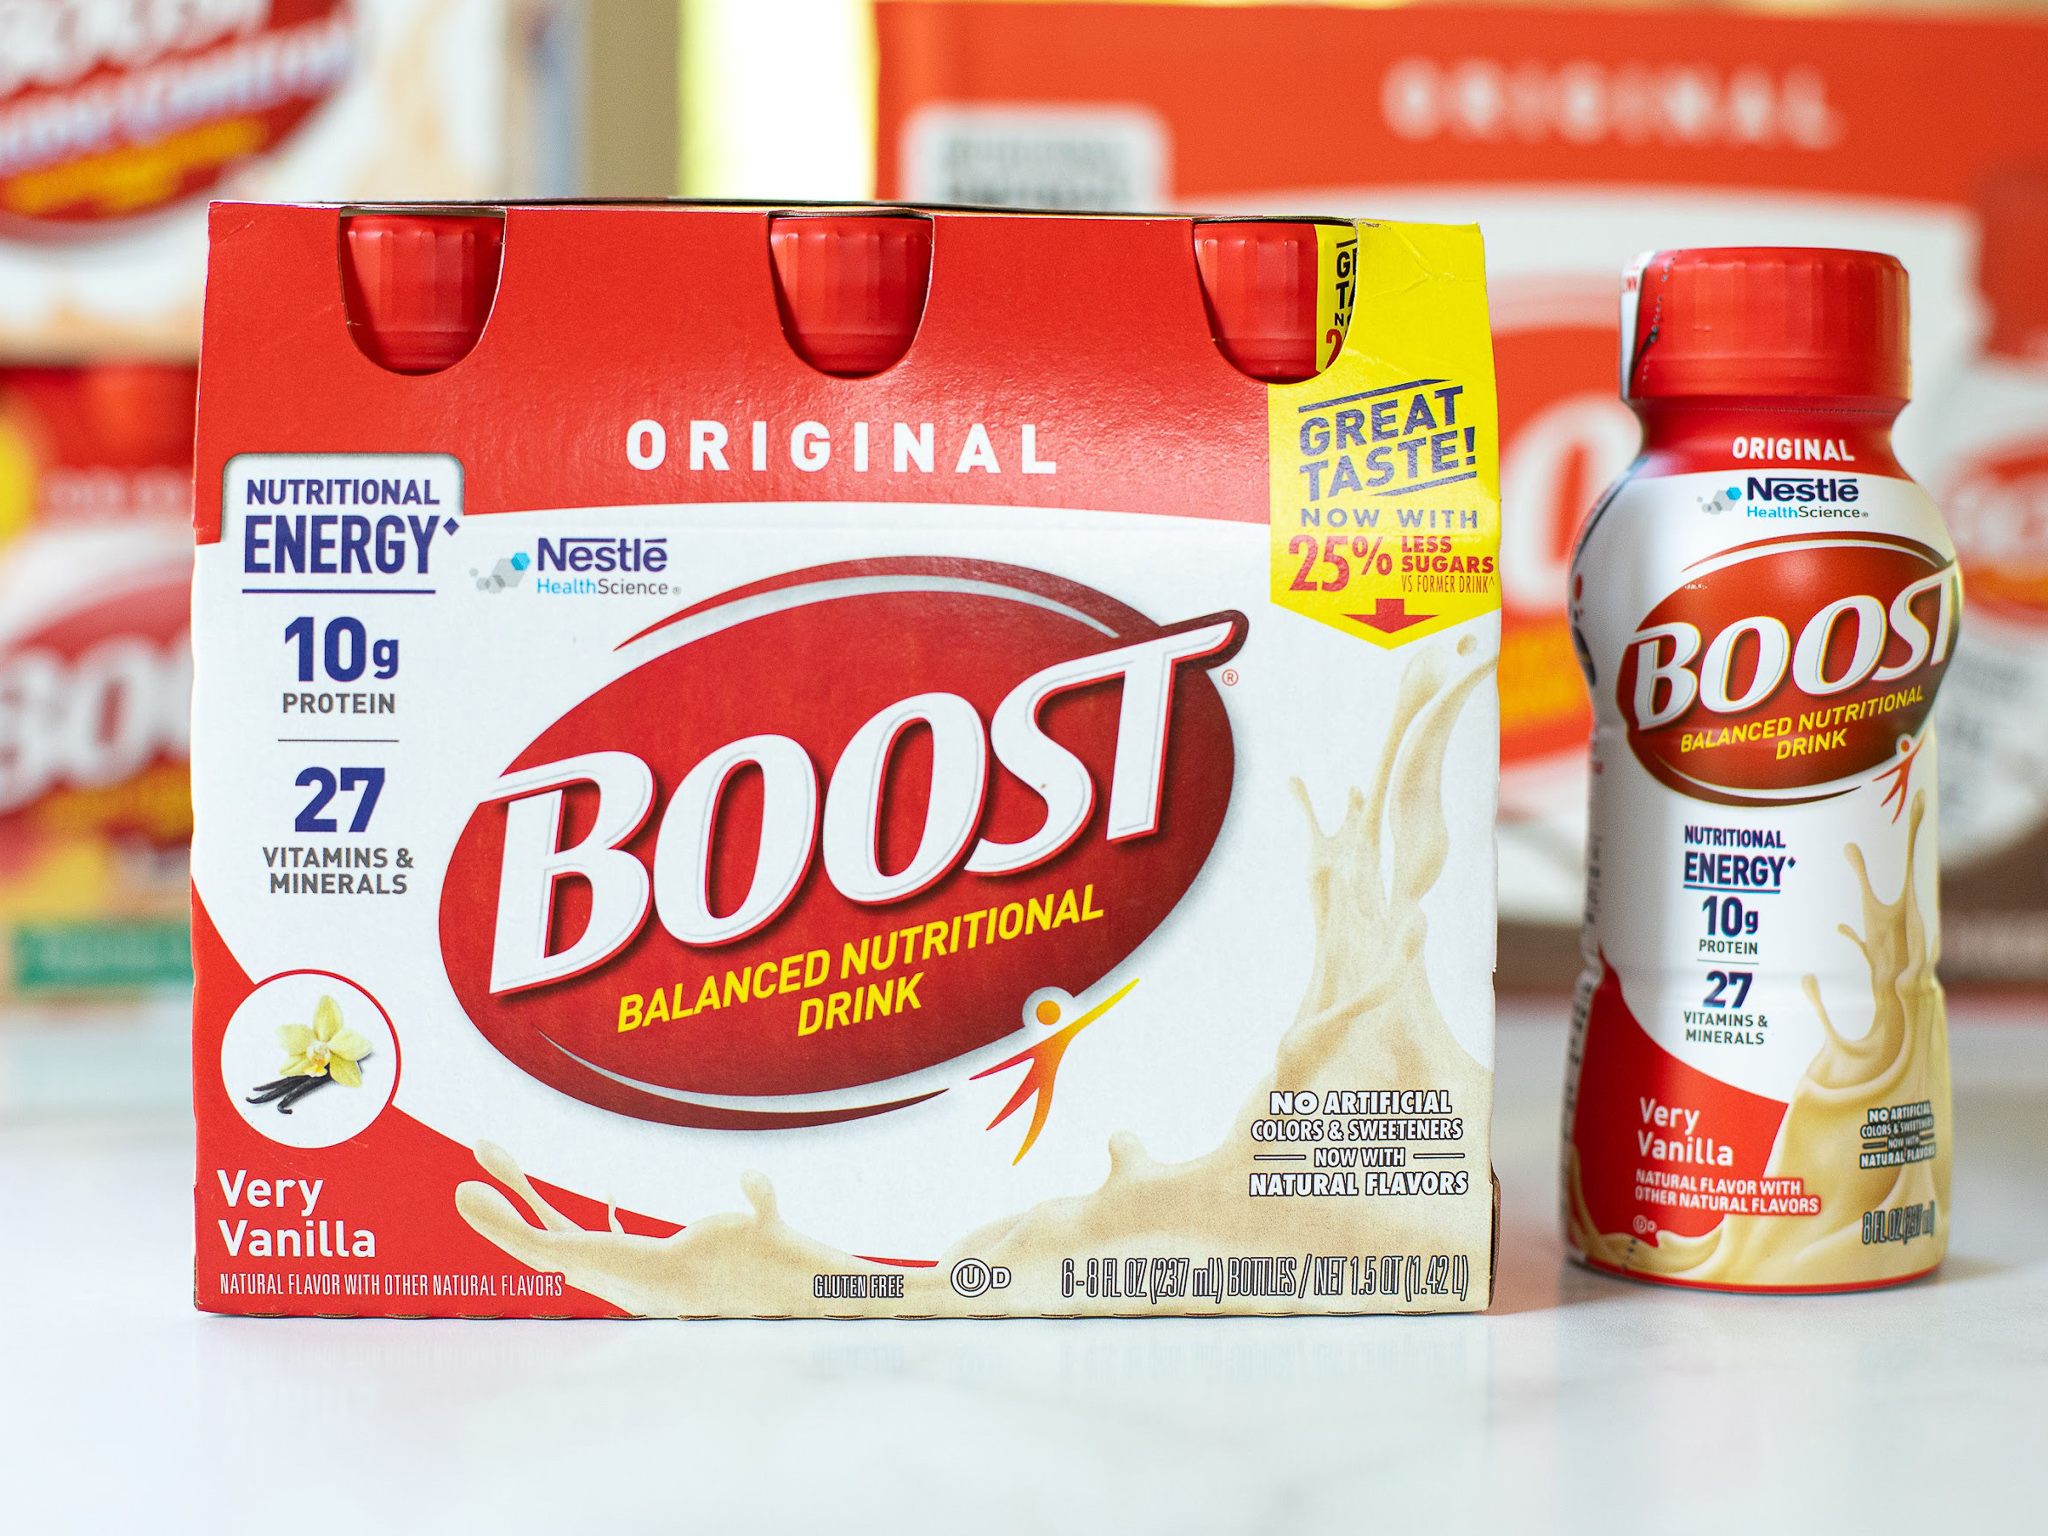 Get Boost Nutritional Drinks As Low As $4.49 Per Pack At Publix (Regular Price $9.99)